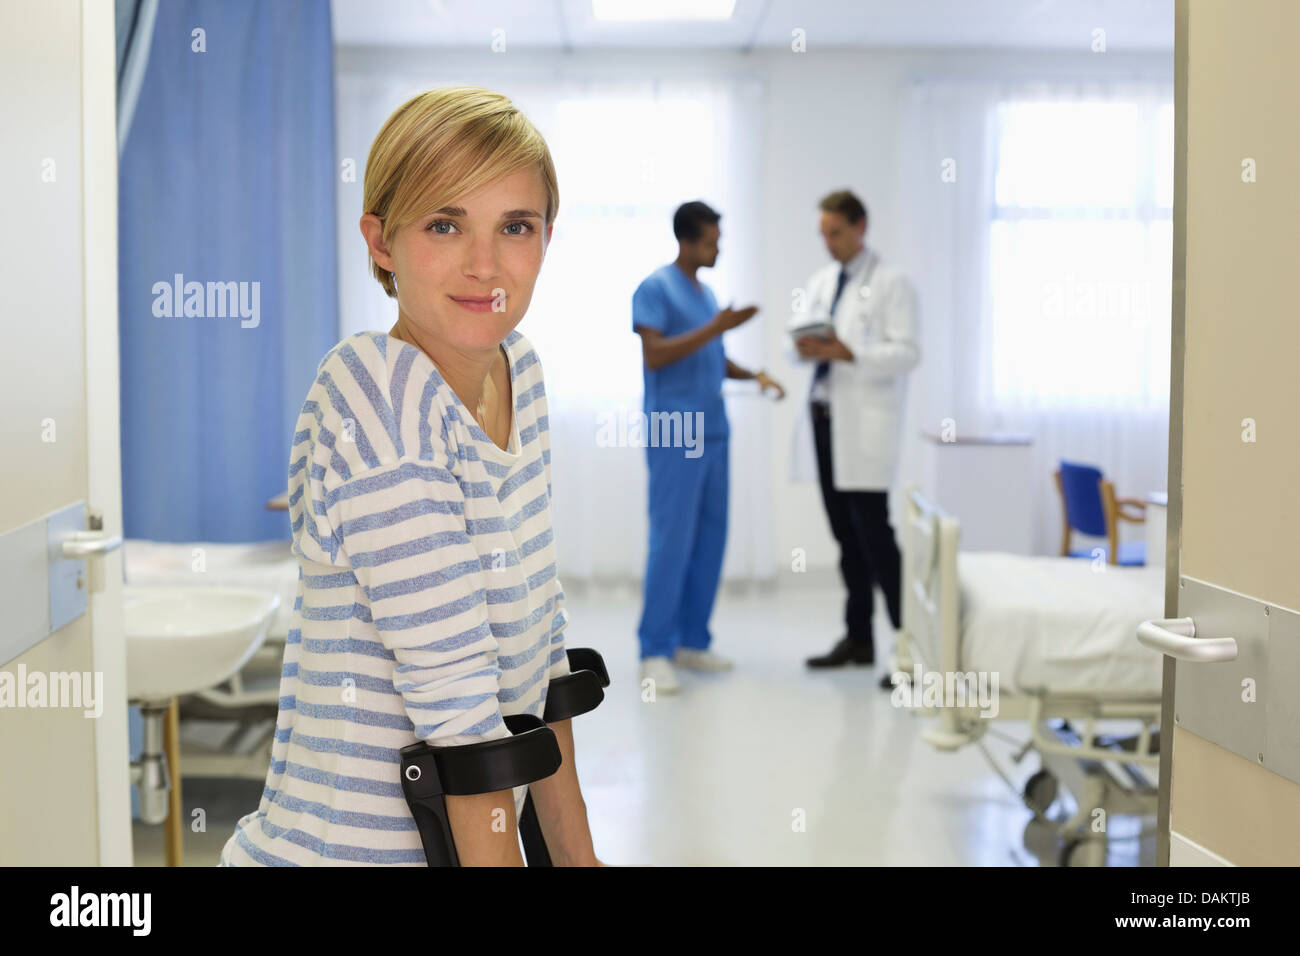 Patient using crutches in hospital room Stock Photo